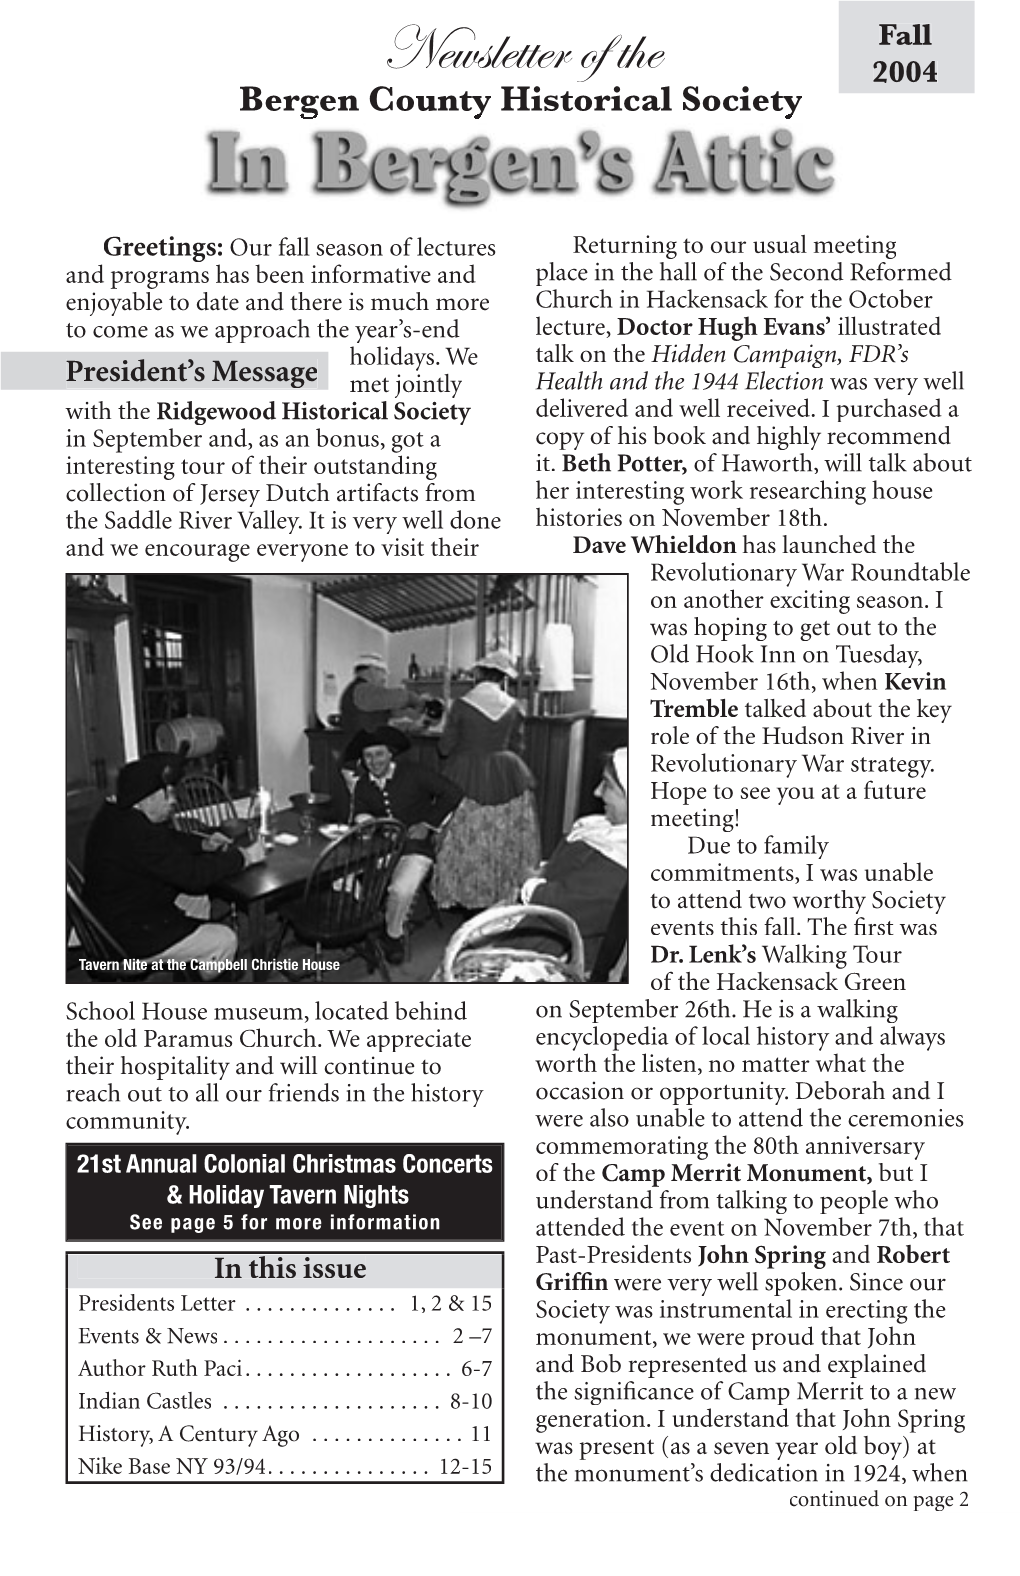 Newsletter of the 2004 Bergenbergen County Historical Society